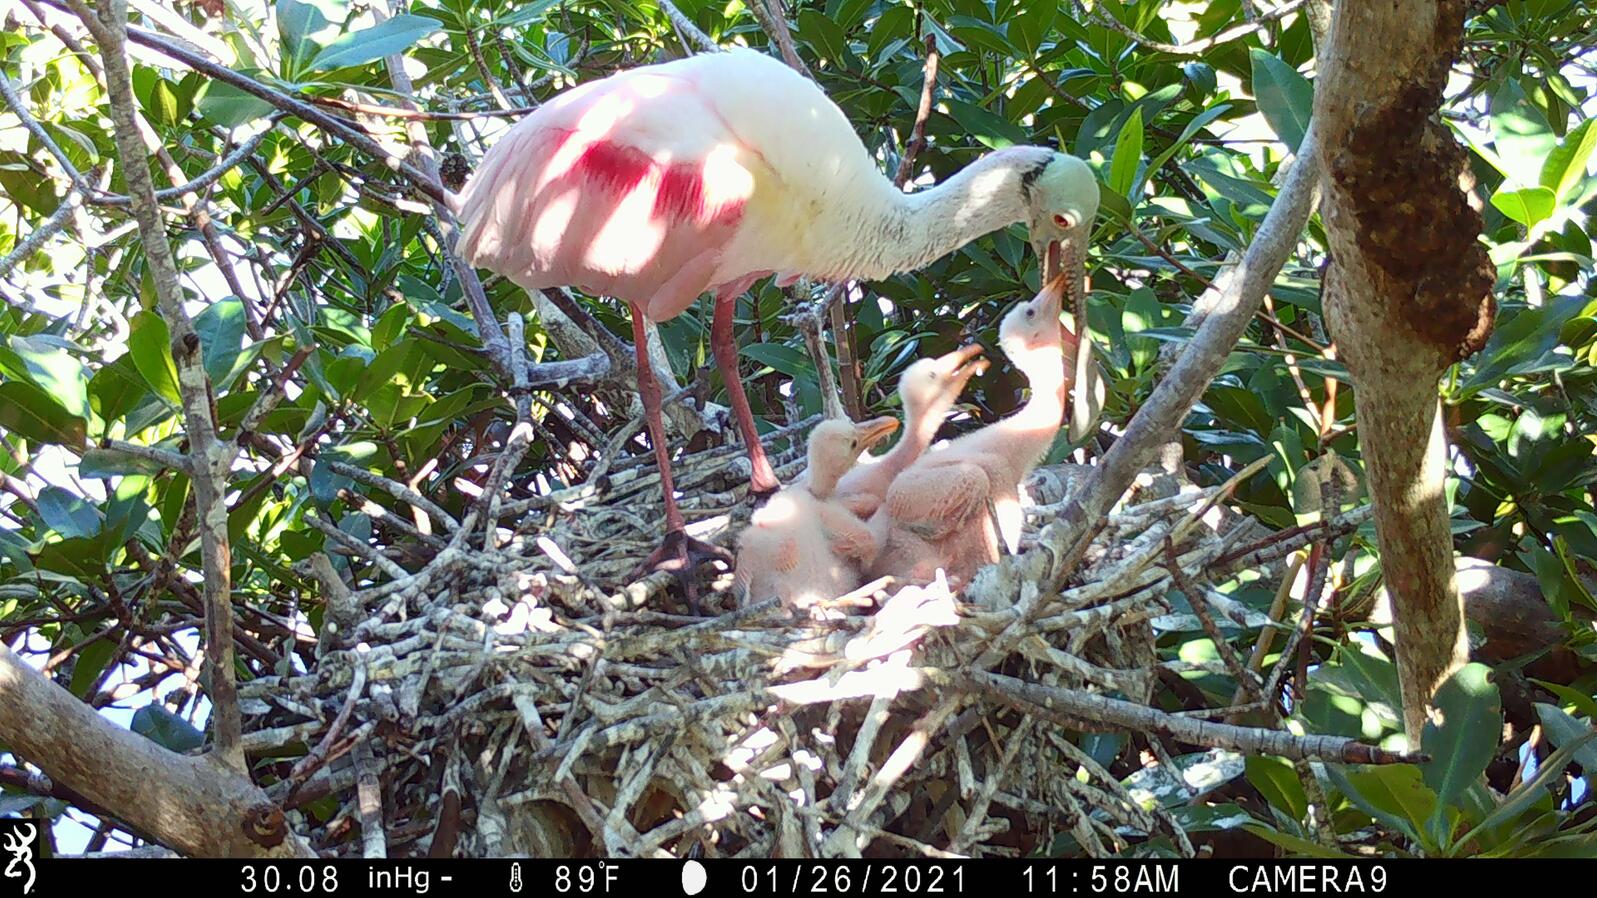 Roseate Spoonbill on its nest, photo taken by the trail camera.